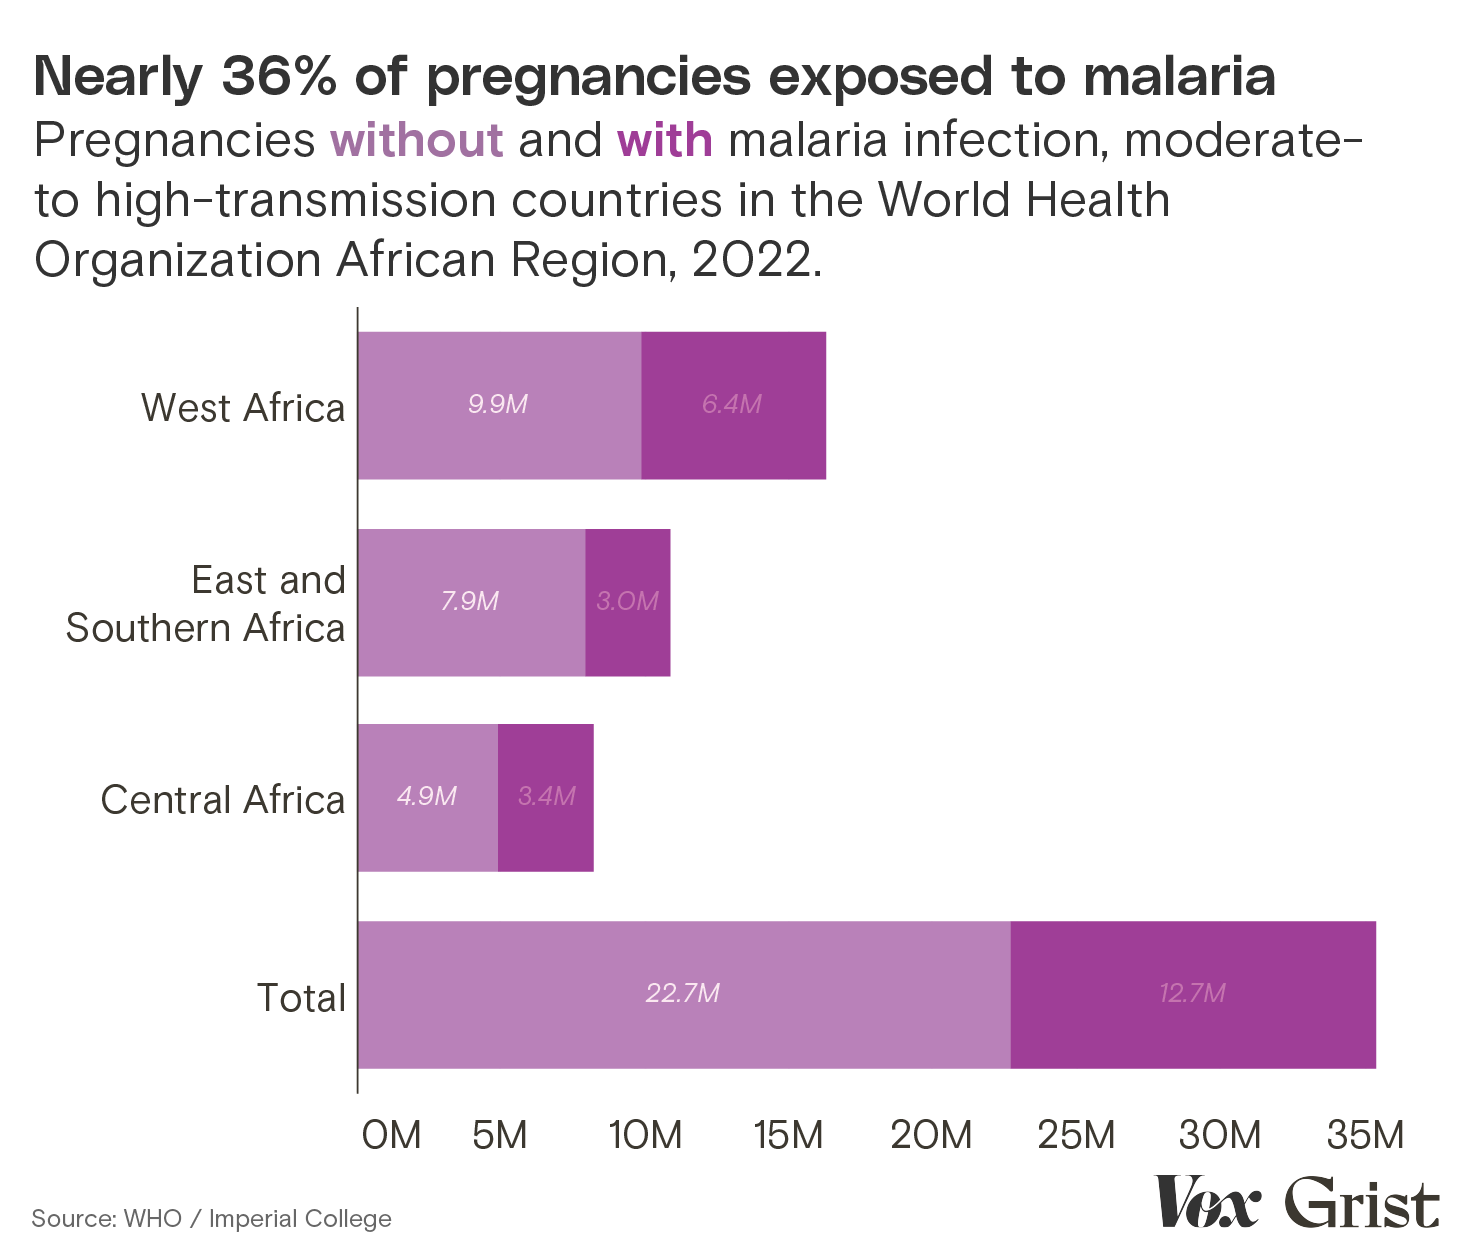 A bar chart showing pregnancies without and with malaria infection in moderate- to high-transmission countries in the WHO African Region, 2022. Nearly 36% of pregnancies are exposed to malaria.